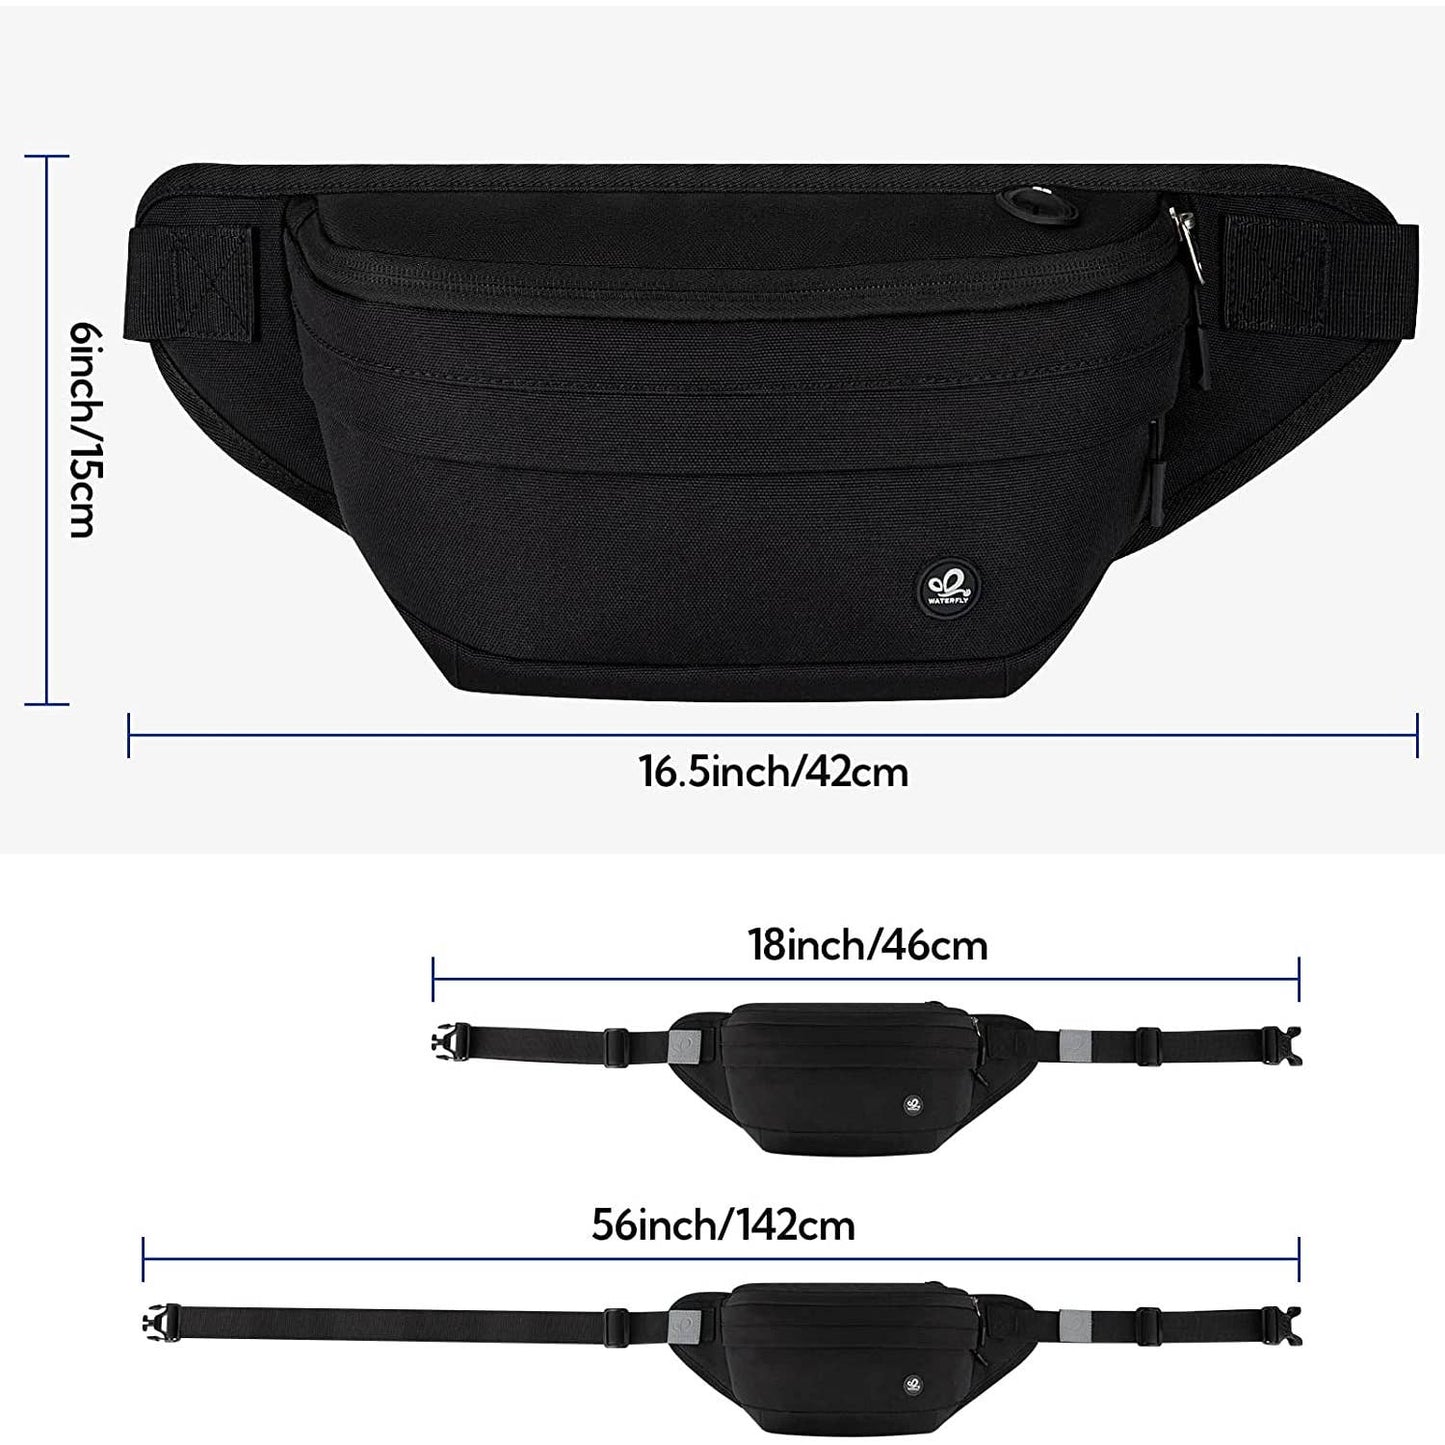 WATERFLY Fanny Pack Water Resistant Large Hiking Waist Bag